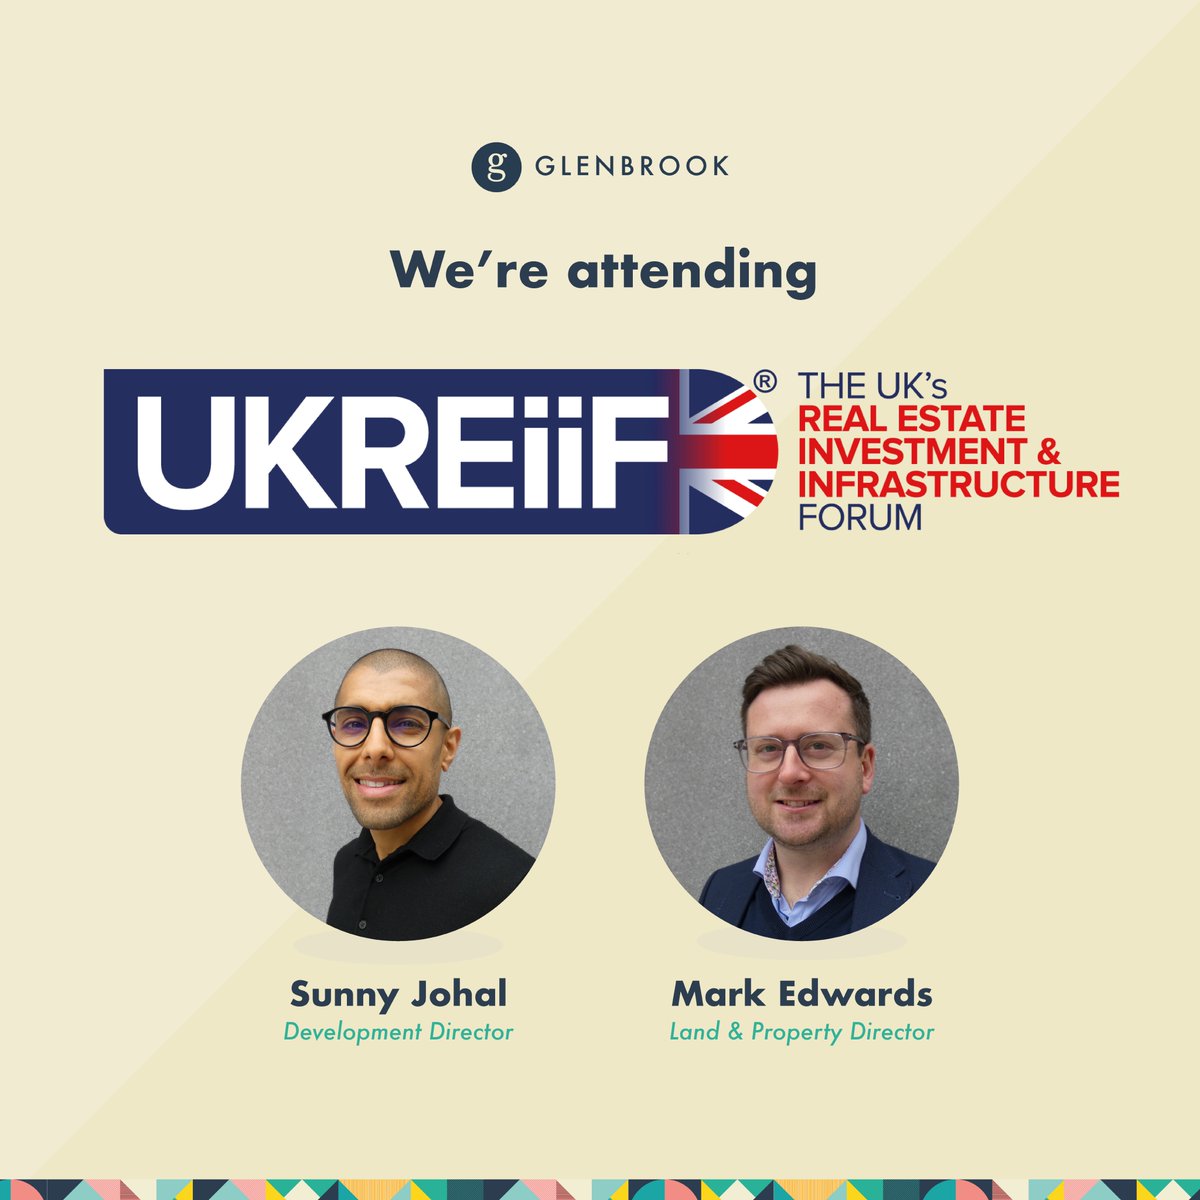 Will we see you at this year’s @UKREiiF? One of the biggest events in the property calendar, this year’s event will once again take place in Leeds, and our colleagues Sunny Johal and Mark Edwards will be there all week. We hope to see you there 👋🏼